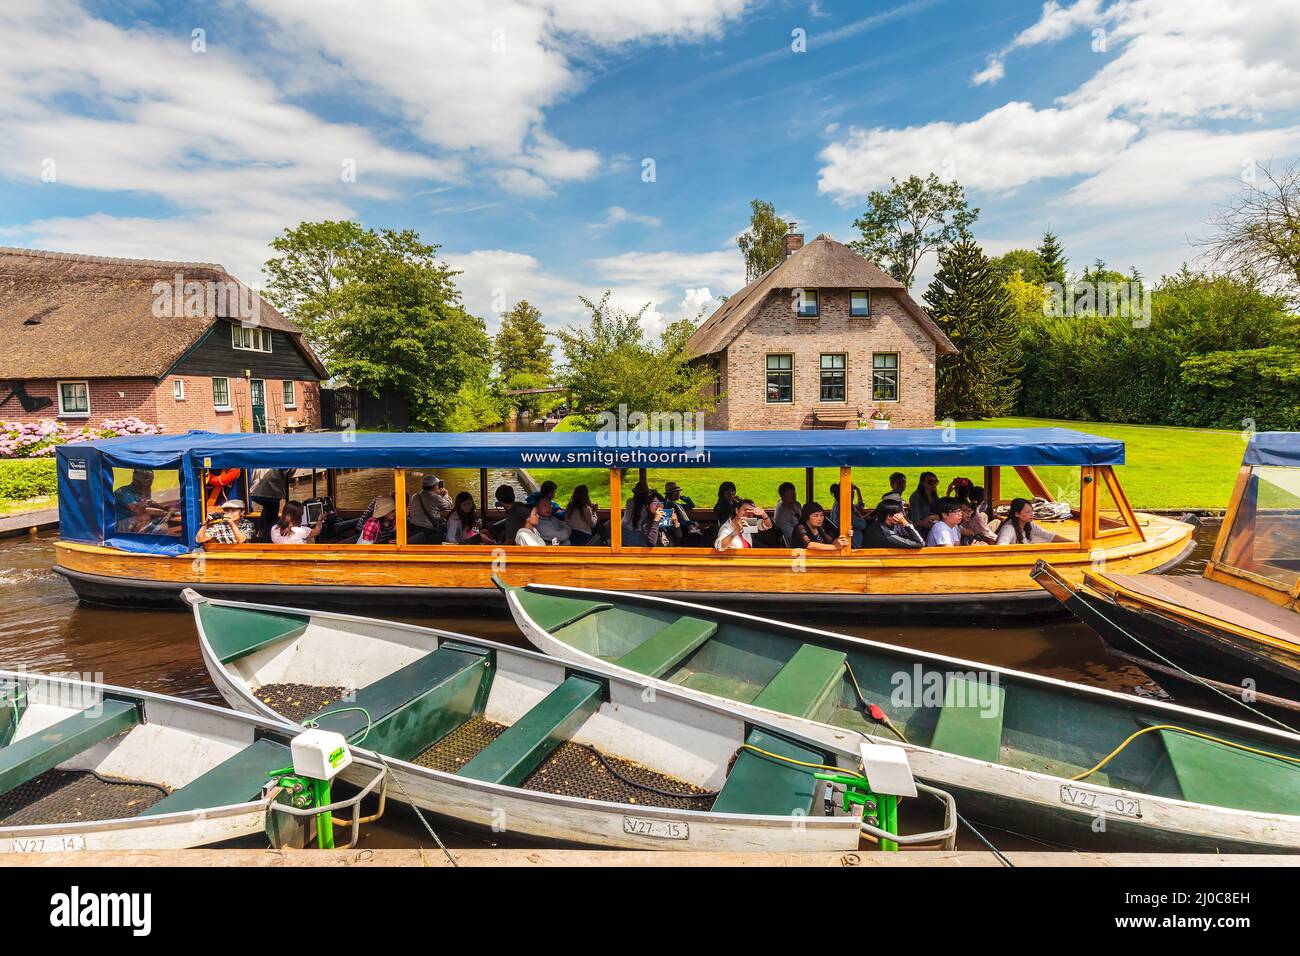 GIETHOORN, THE NETHERLANDS - JULY 26, 2016: Tourists enjoying a canal cruise with a wooden boat in the famous Dutch village of Giethoorn, The Netherla Stock Photo